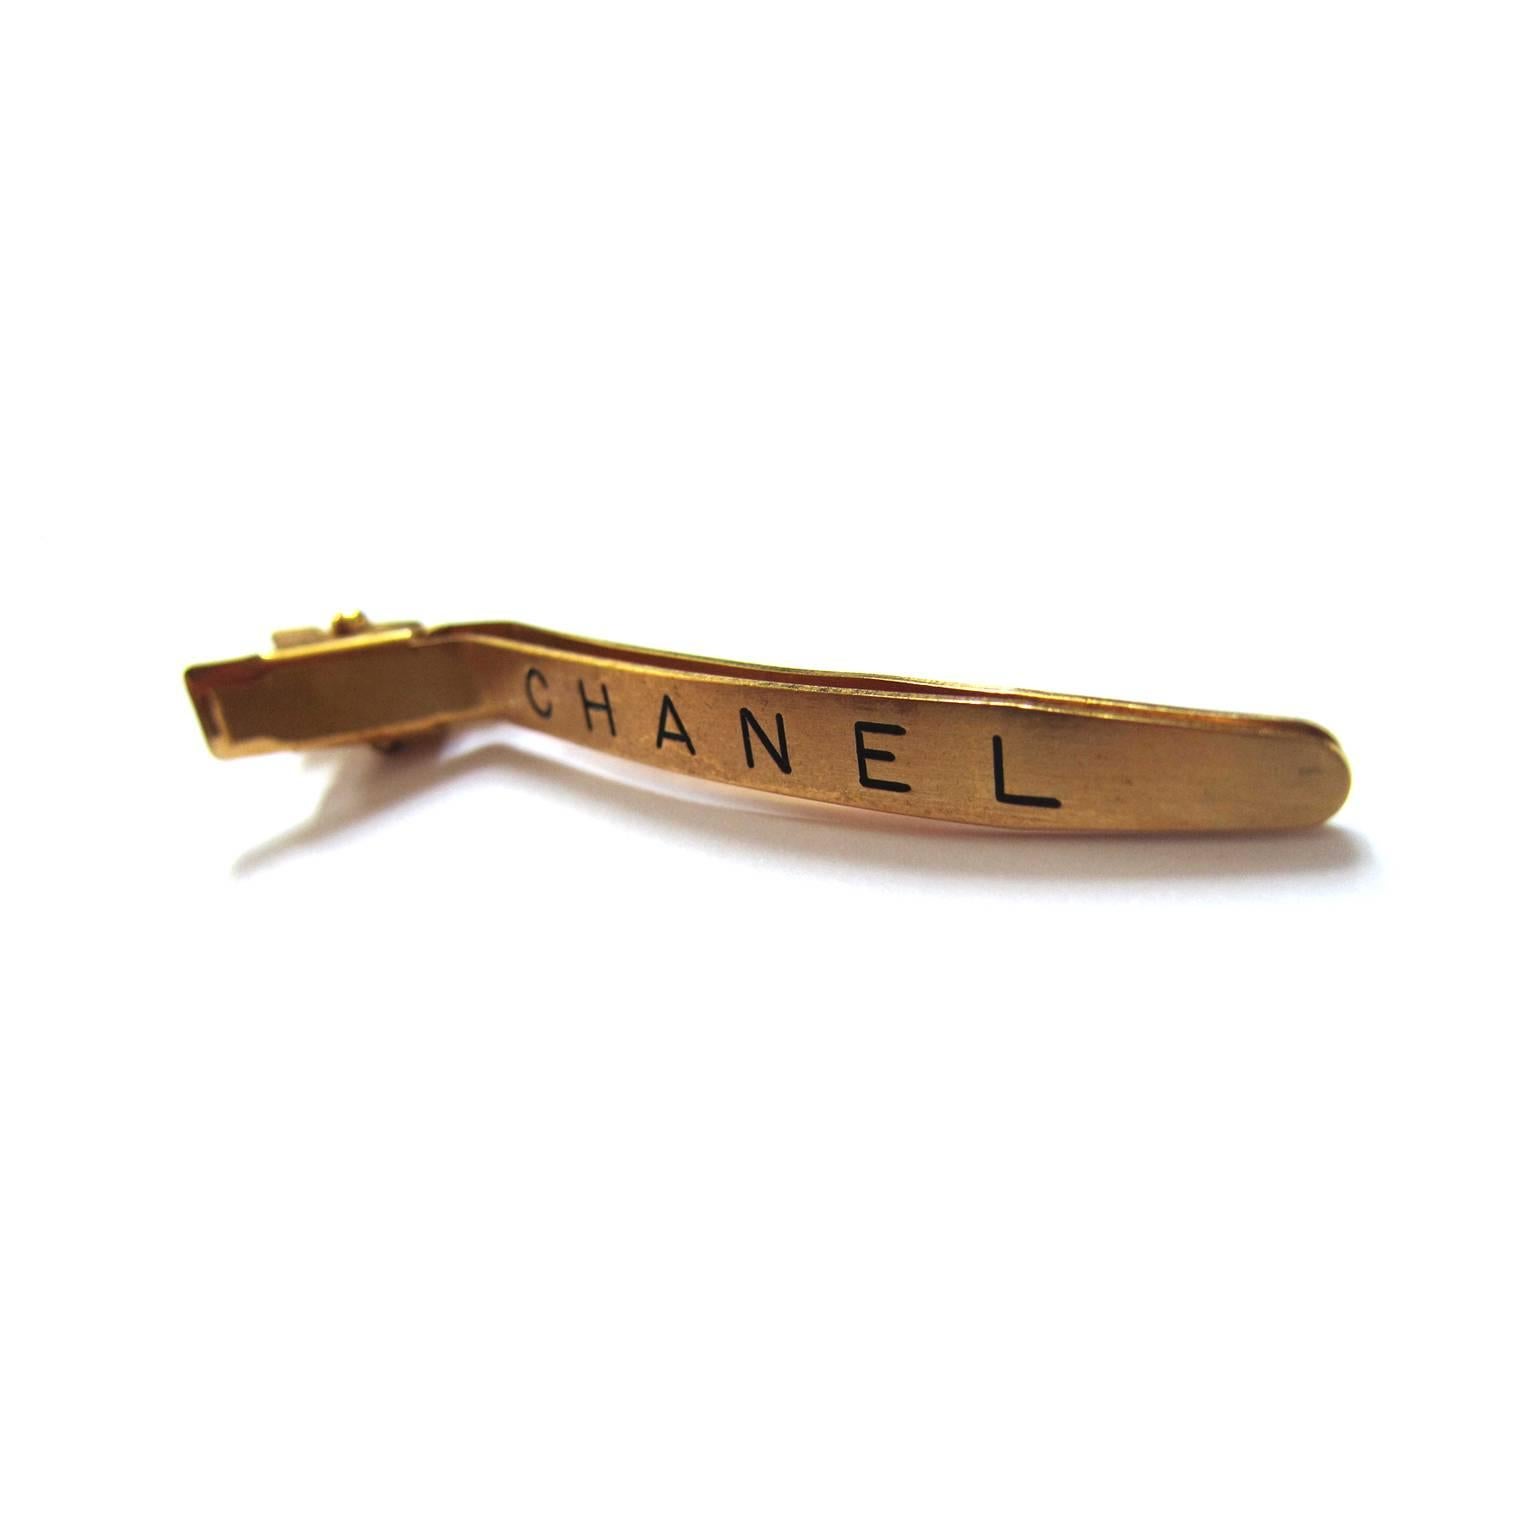 Chanel gold plated hair clip pin with embossed logo.

Measurements : 
Total length: 8.5cm x 0.7cm
